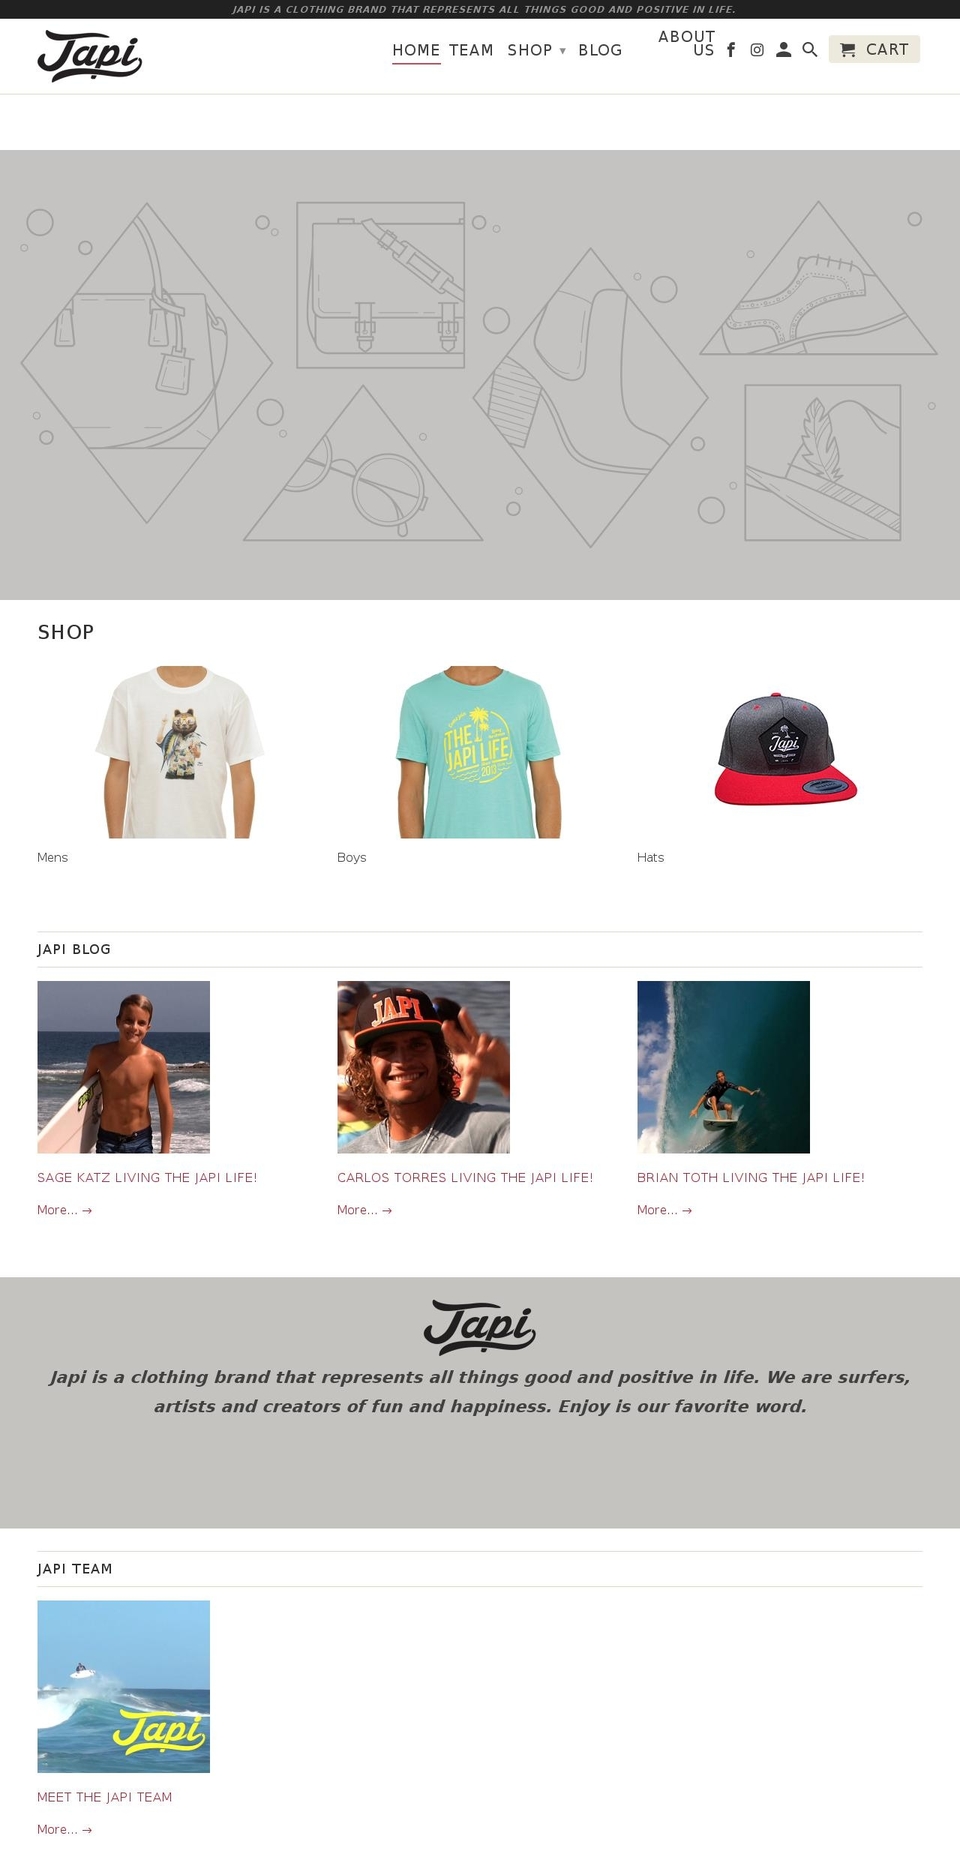 Emerge Shopify theme site example japinoworries.com